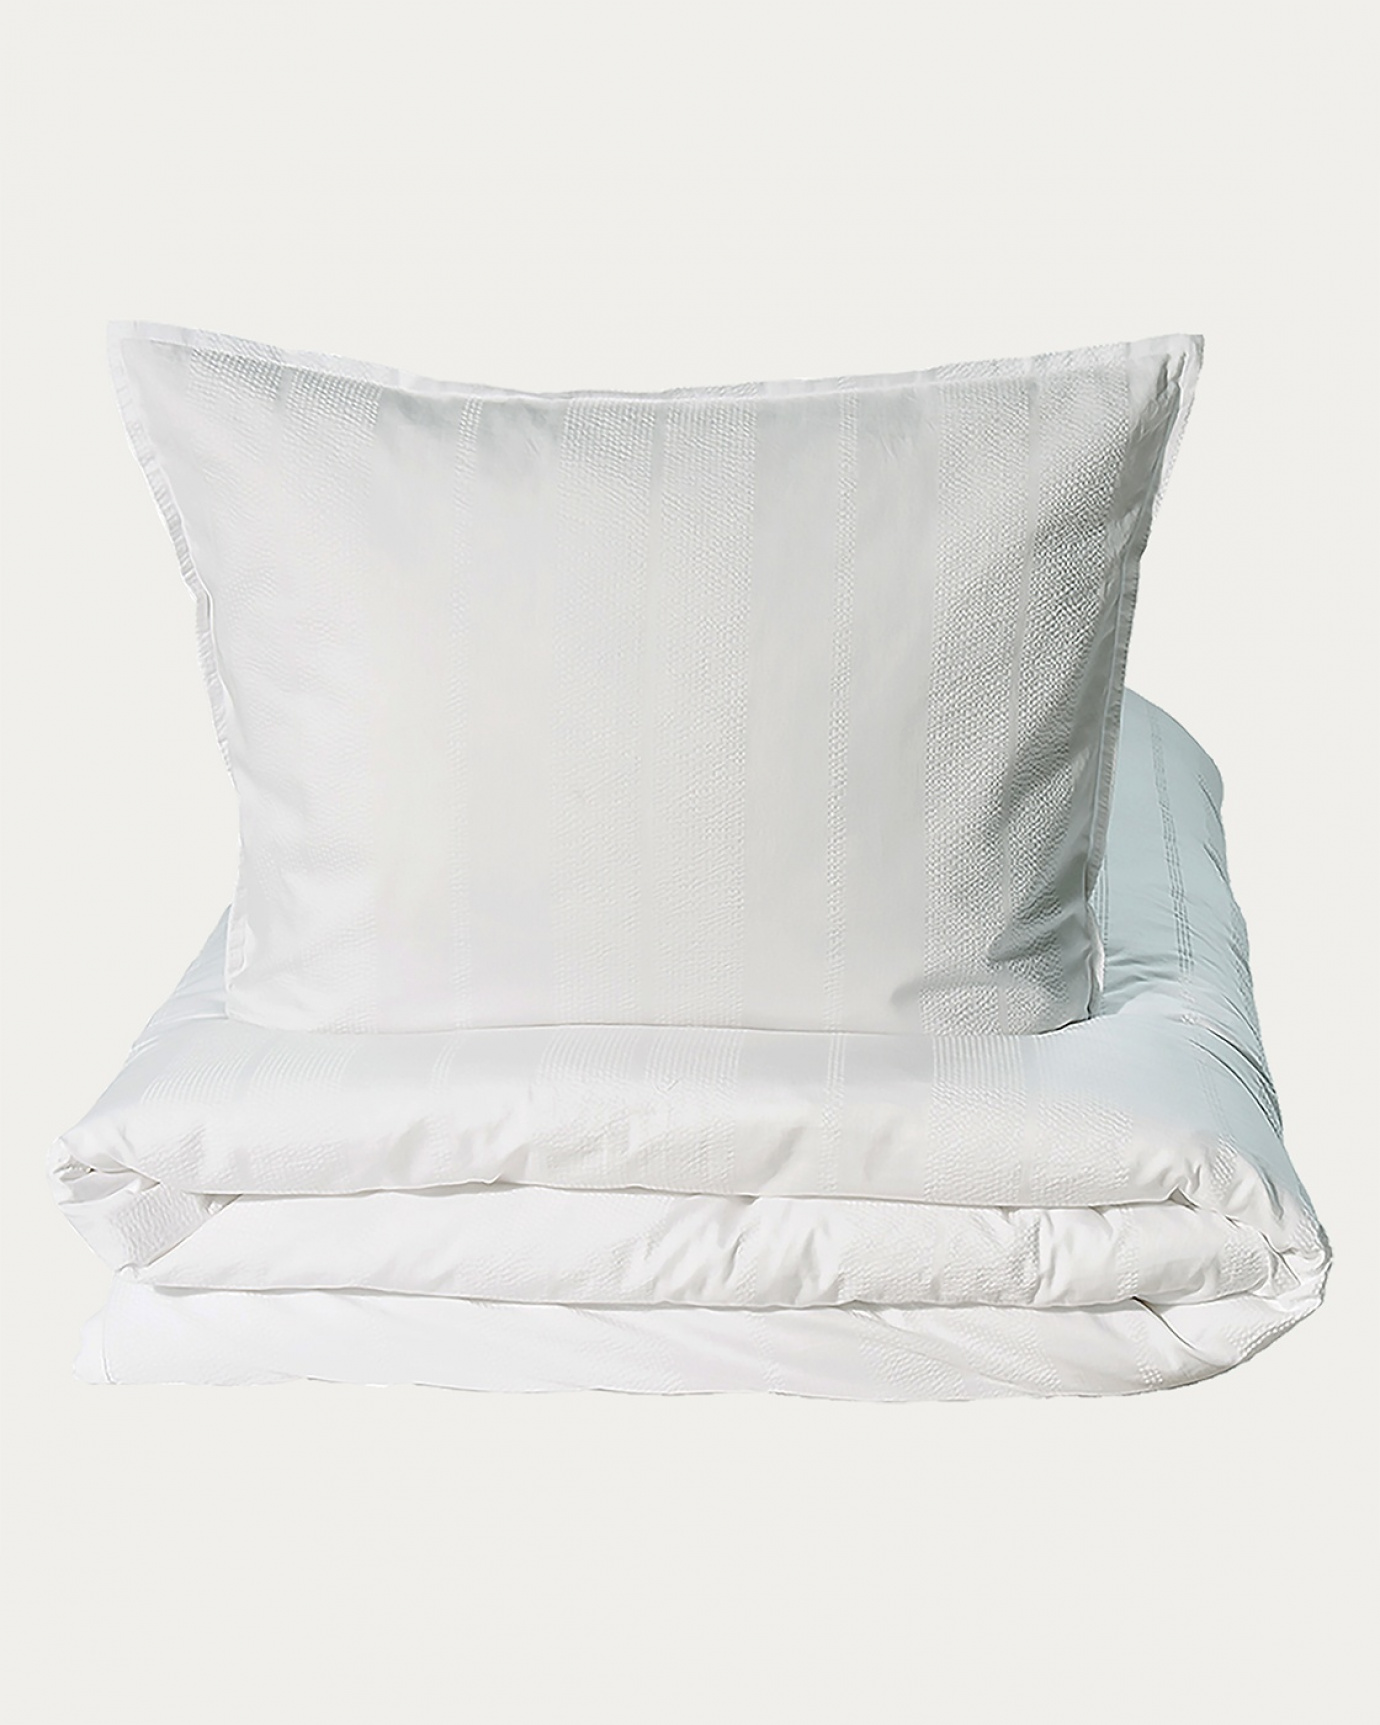 Product image bright white YASMIN bed set of 100% organic cotton satin from LINUM DESIGN. Size duvet cover 240x220 cm, two pillowcases 80x80 cm.